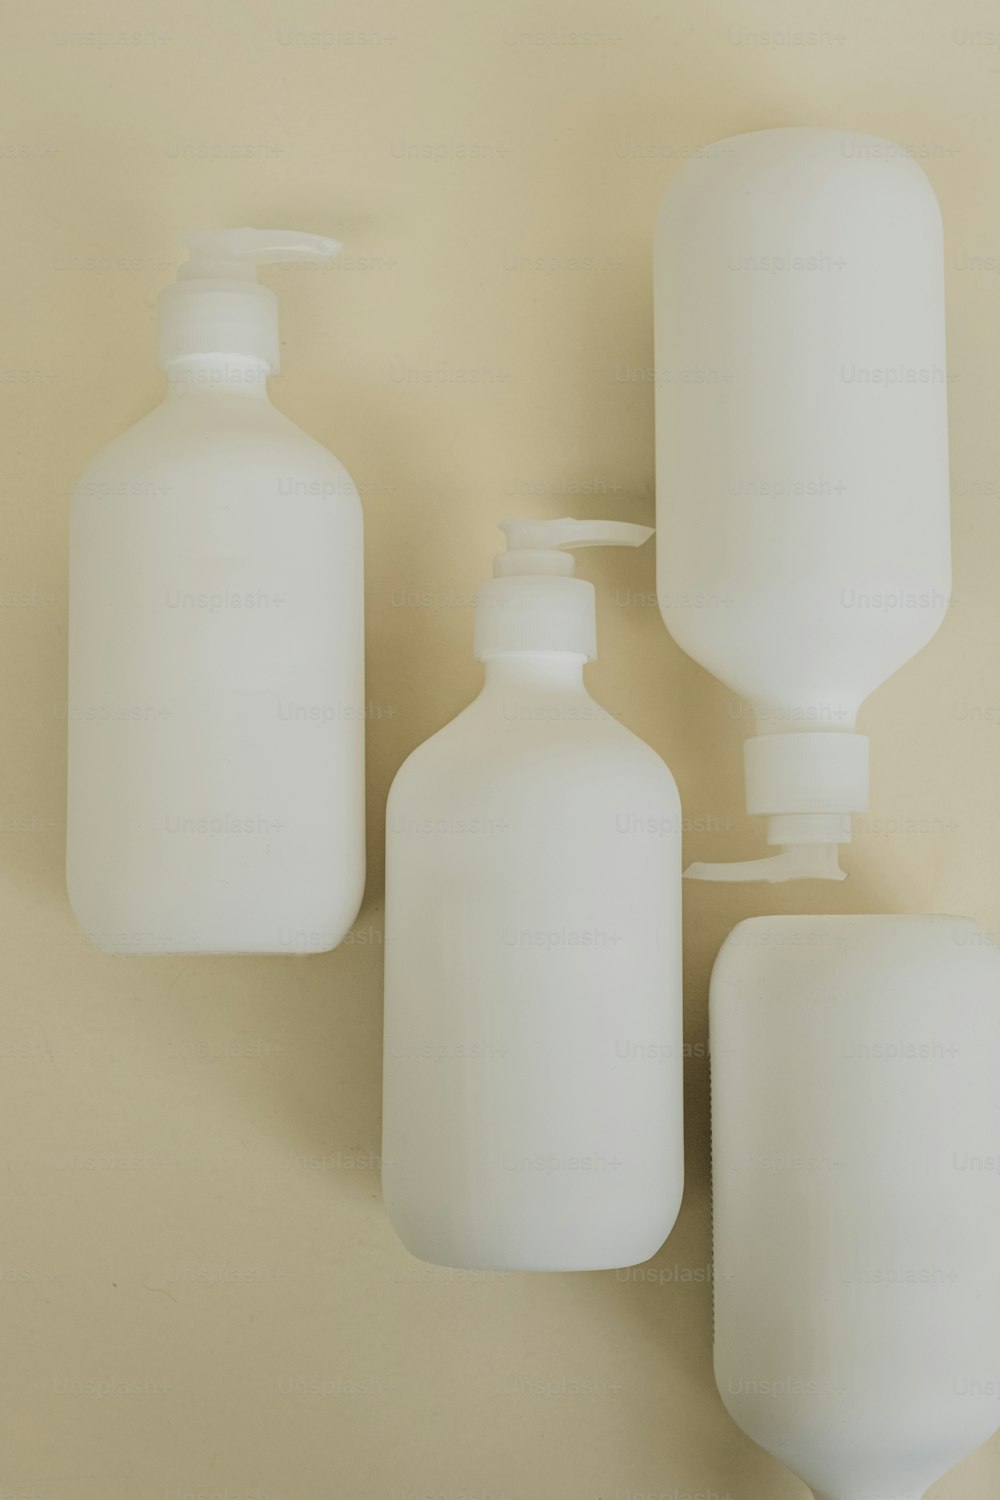 three bottles of soap and a soap dispenser